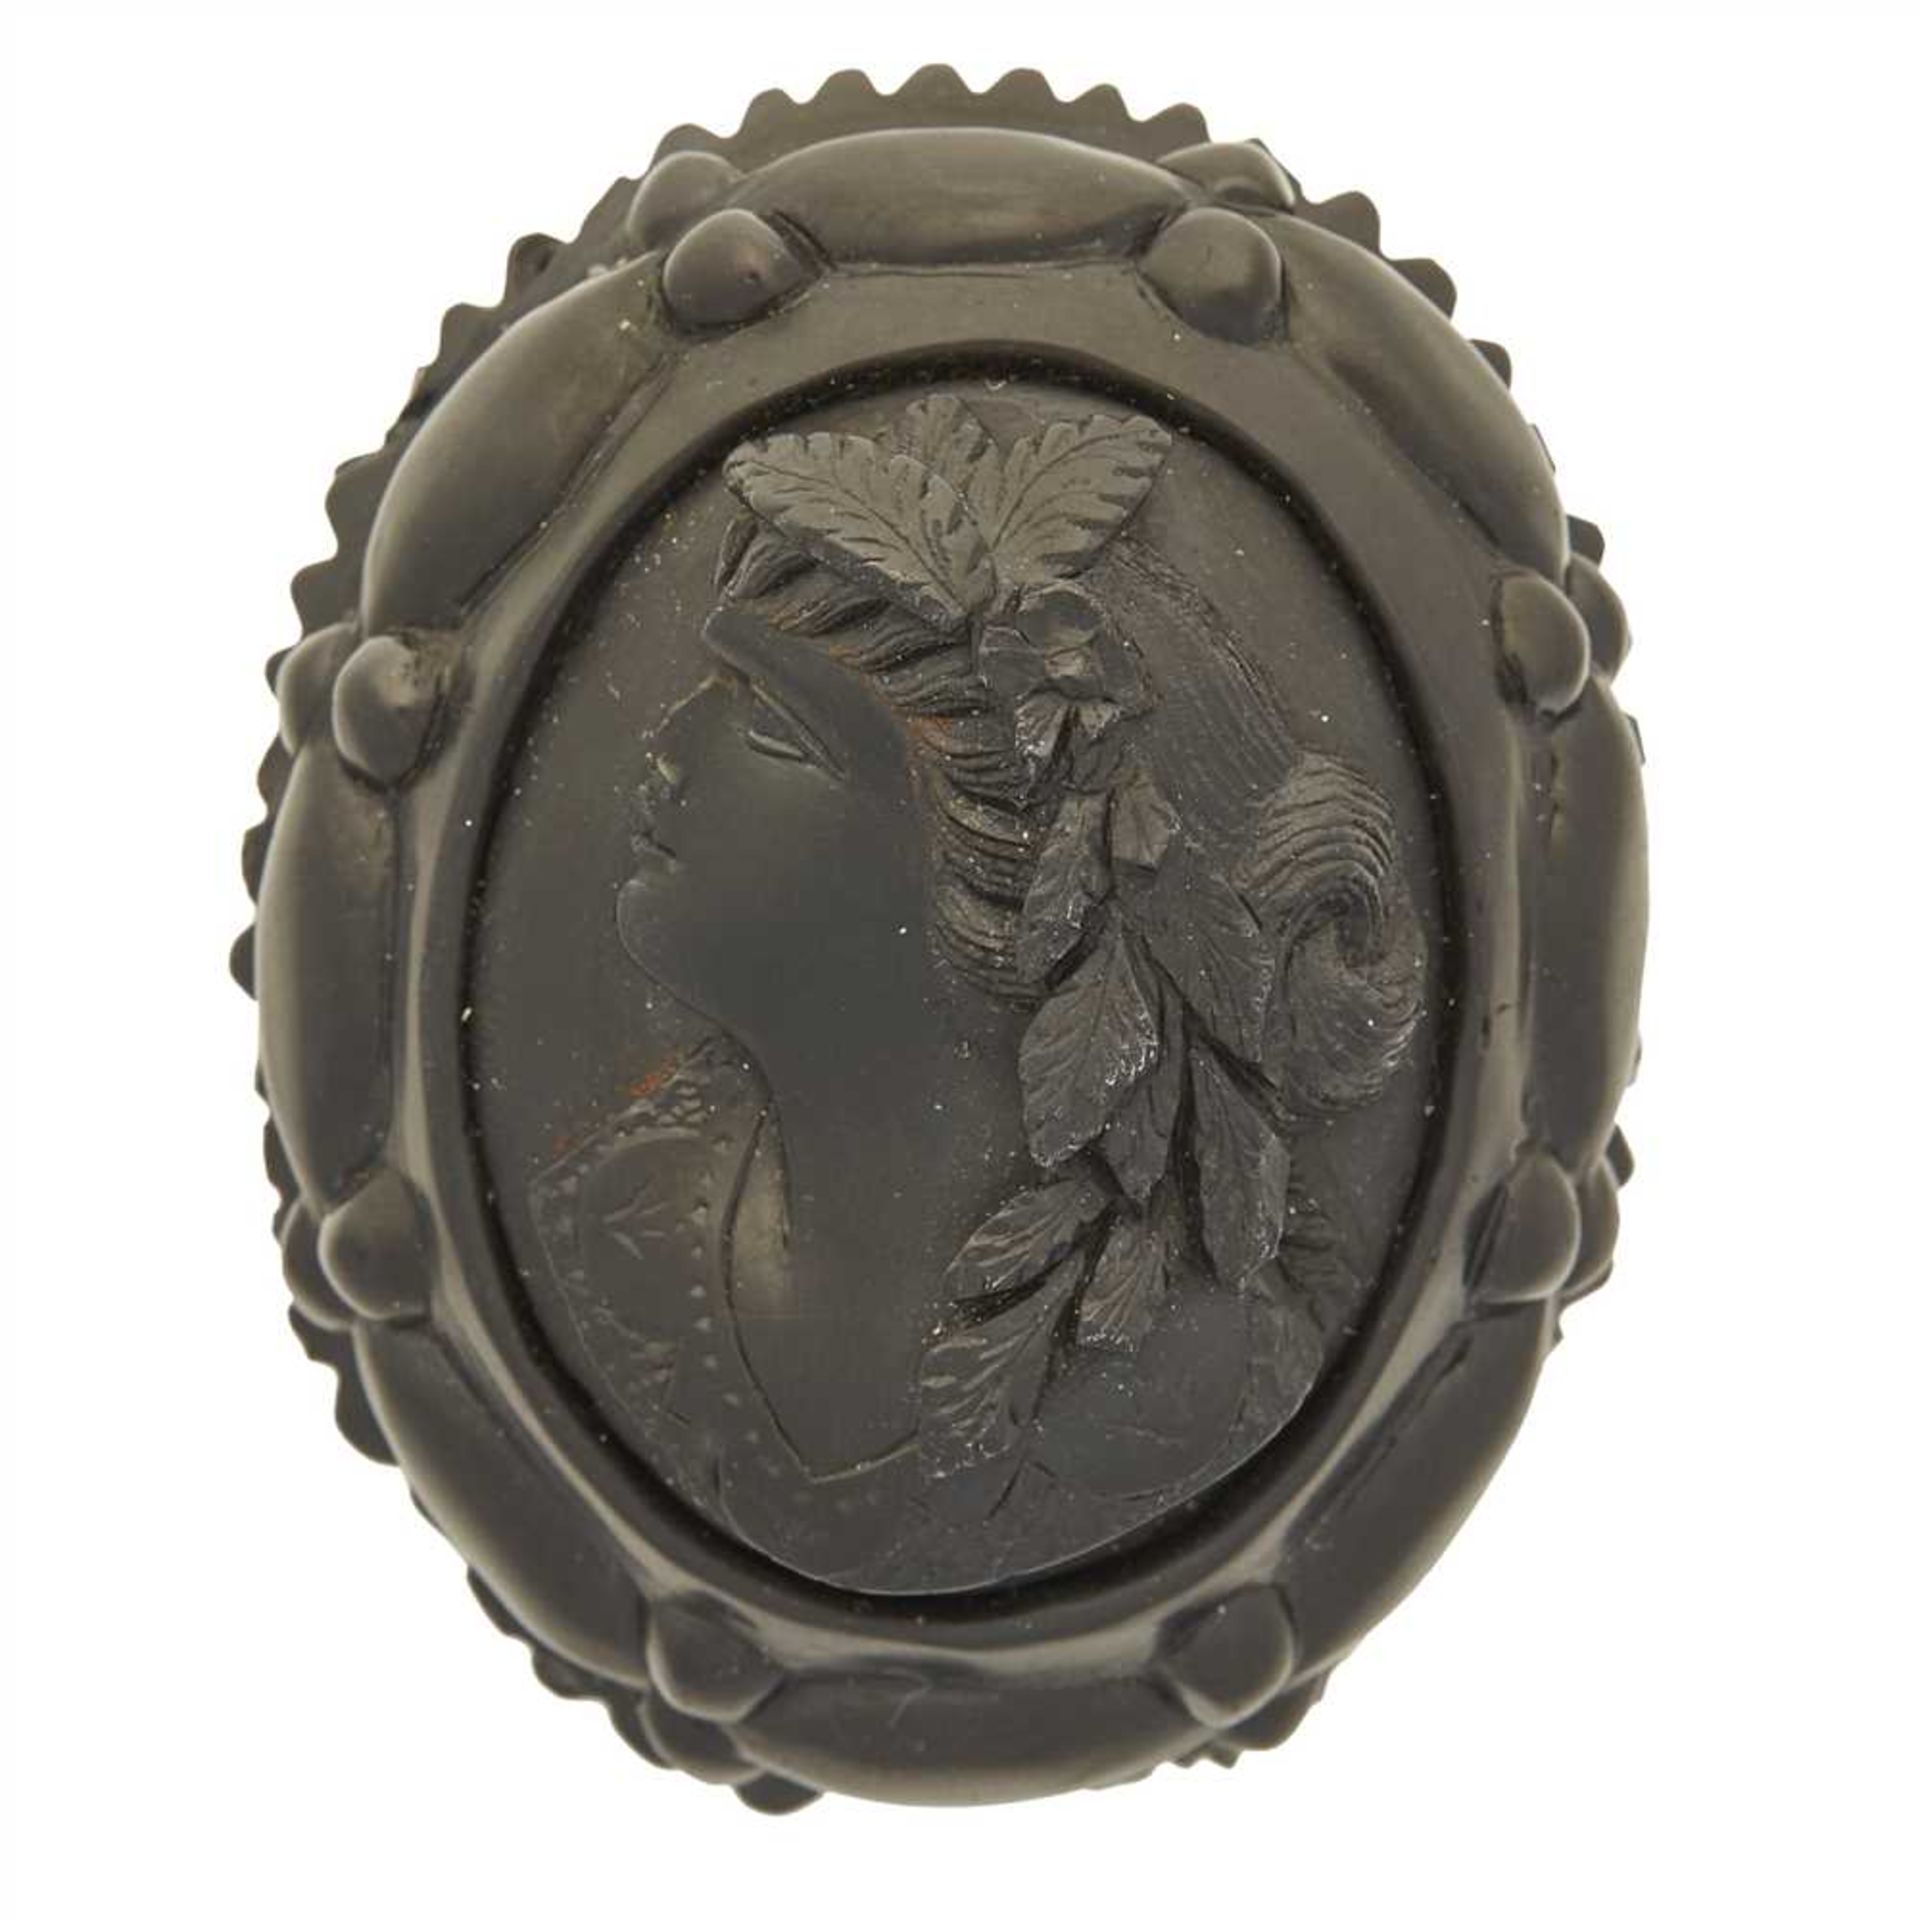 A Regency miniature presented in an oval frame with black enamel detail; together with a jet cameo - Image 2 of 3